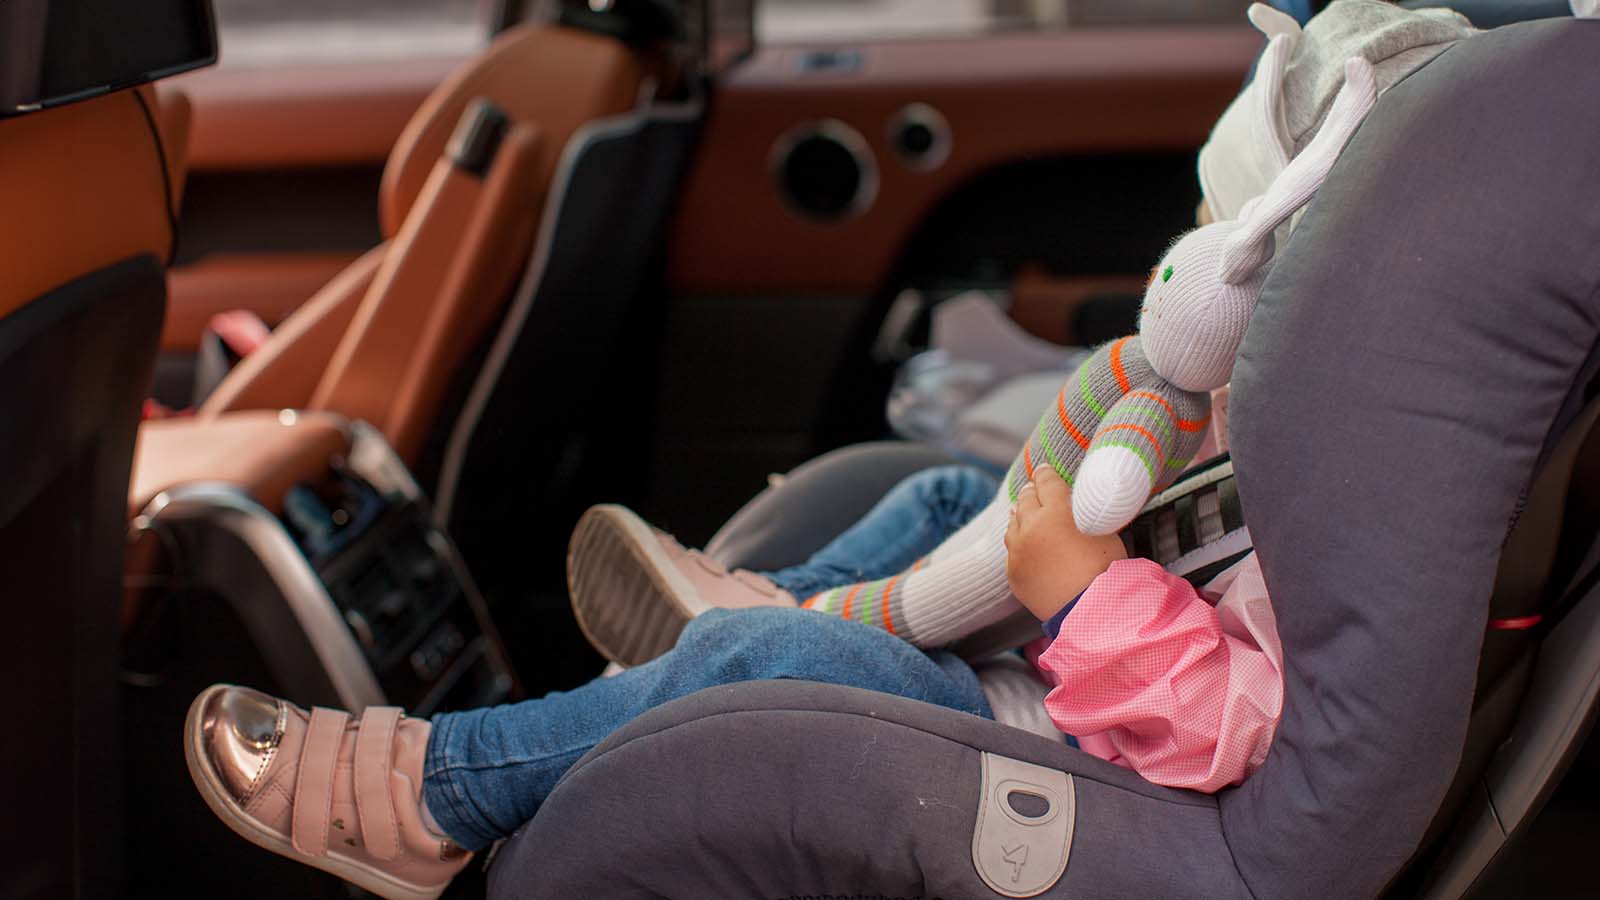 Year-old Baby Buckled into her Car seat, Girl Travels in Car with Parents looking out the Window at sunset - Image